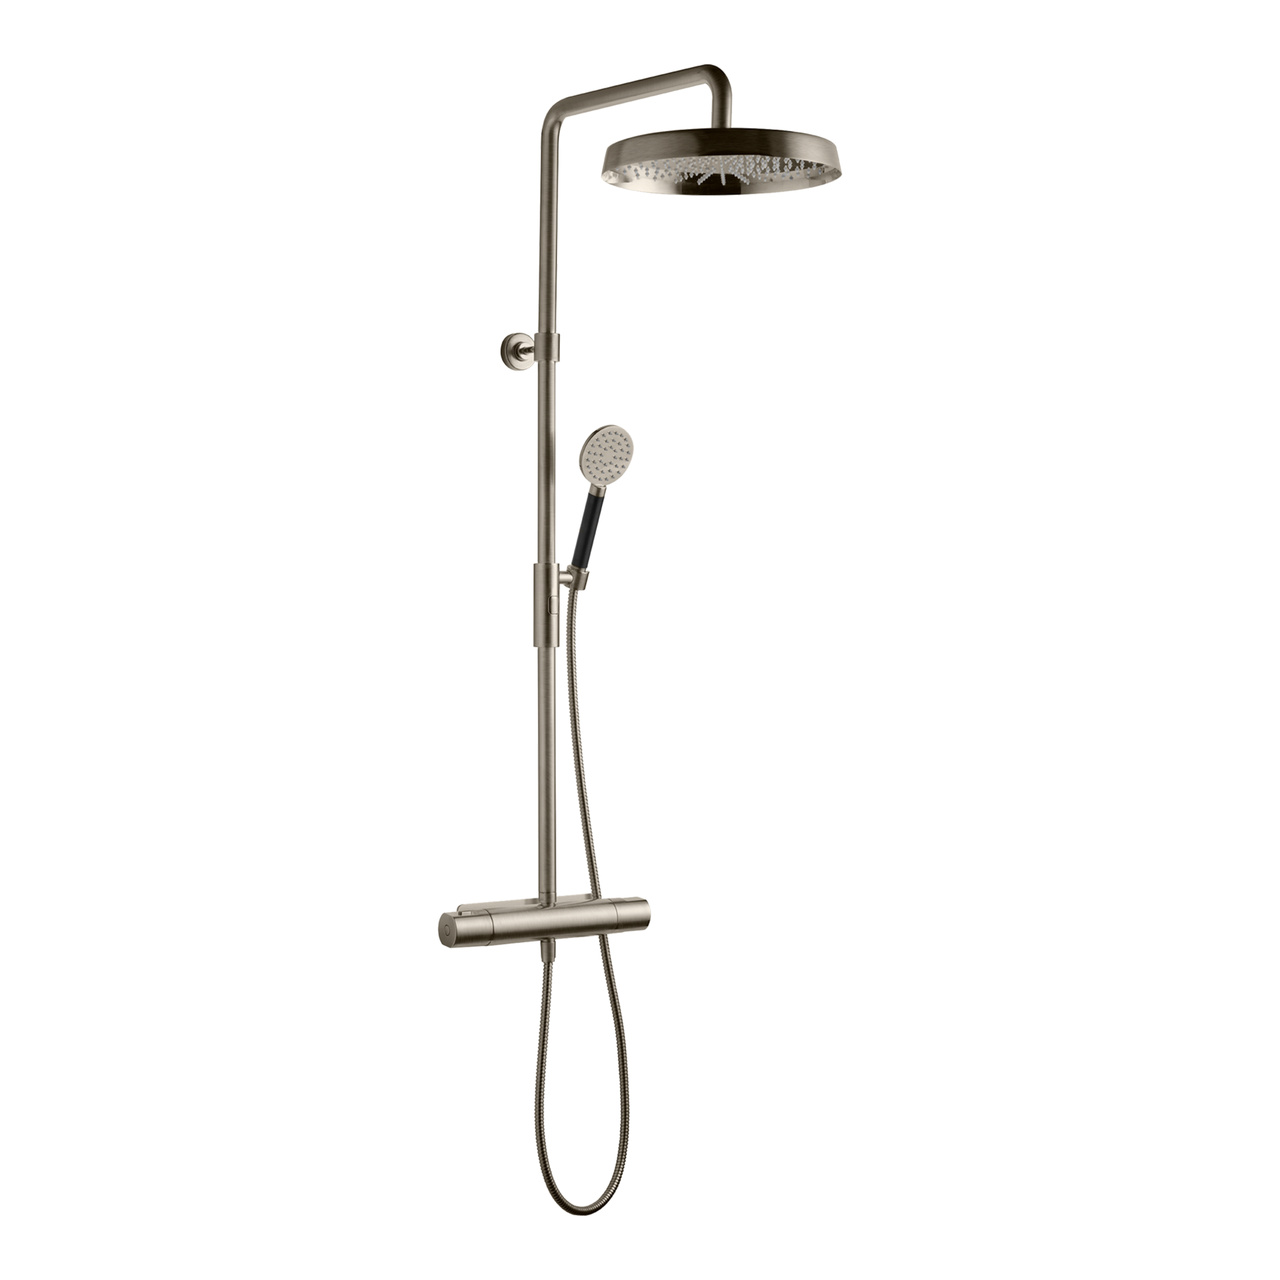 Tapwell Takdusch ARM7200-160 Brushed Nickel